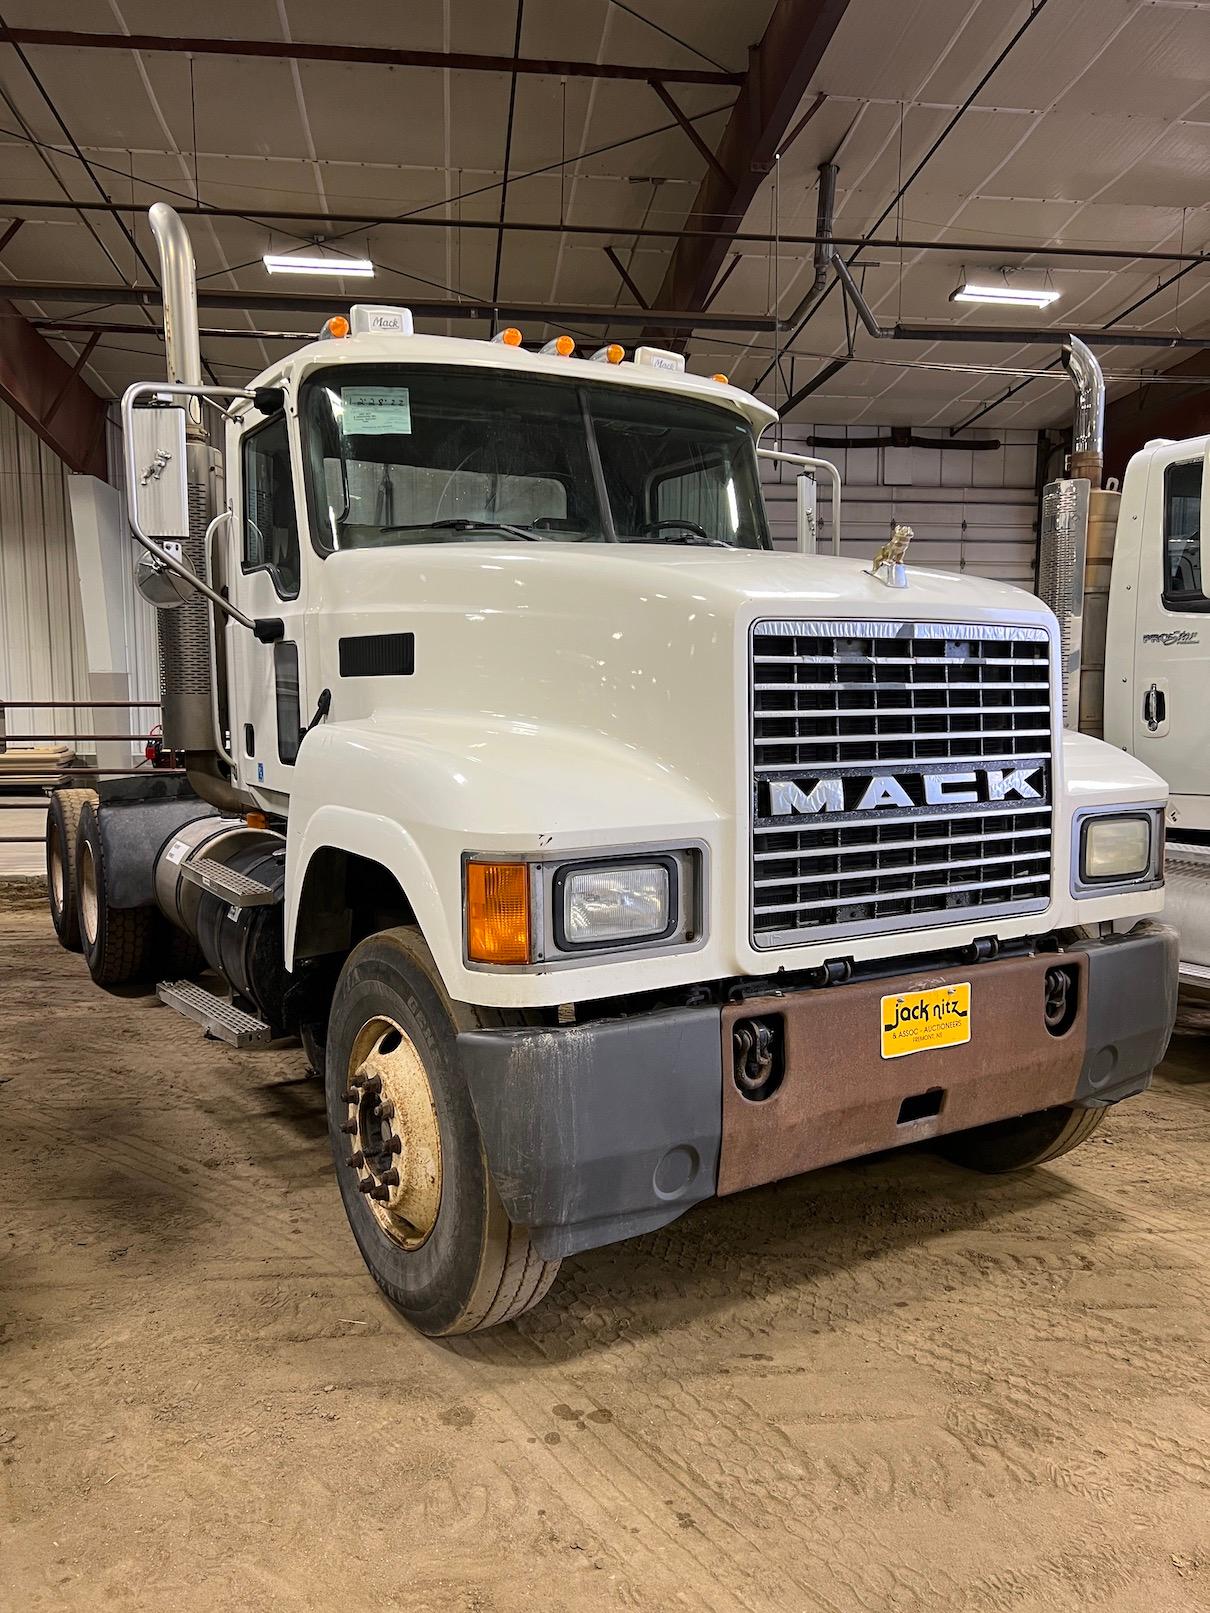 2006 Mack CNH613 Tandem Axle Day Cab Truck Tractor